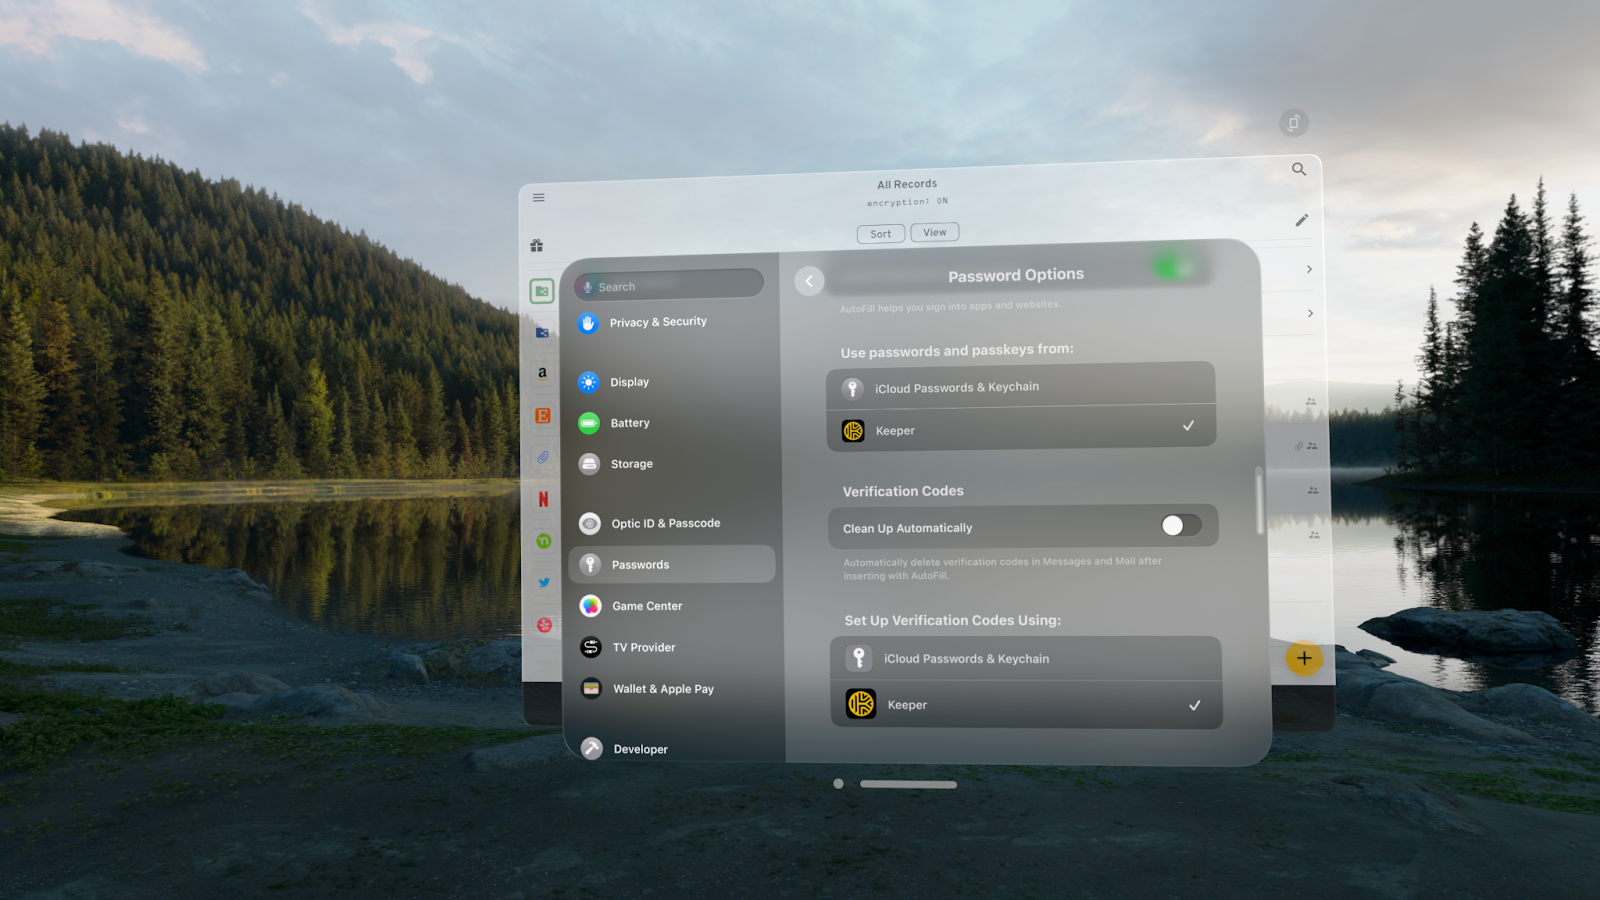 Image showing Apple Vision Pro screen with the option to choose Keeper as the default password manager over iCloud Keychain.